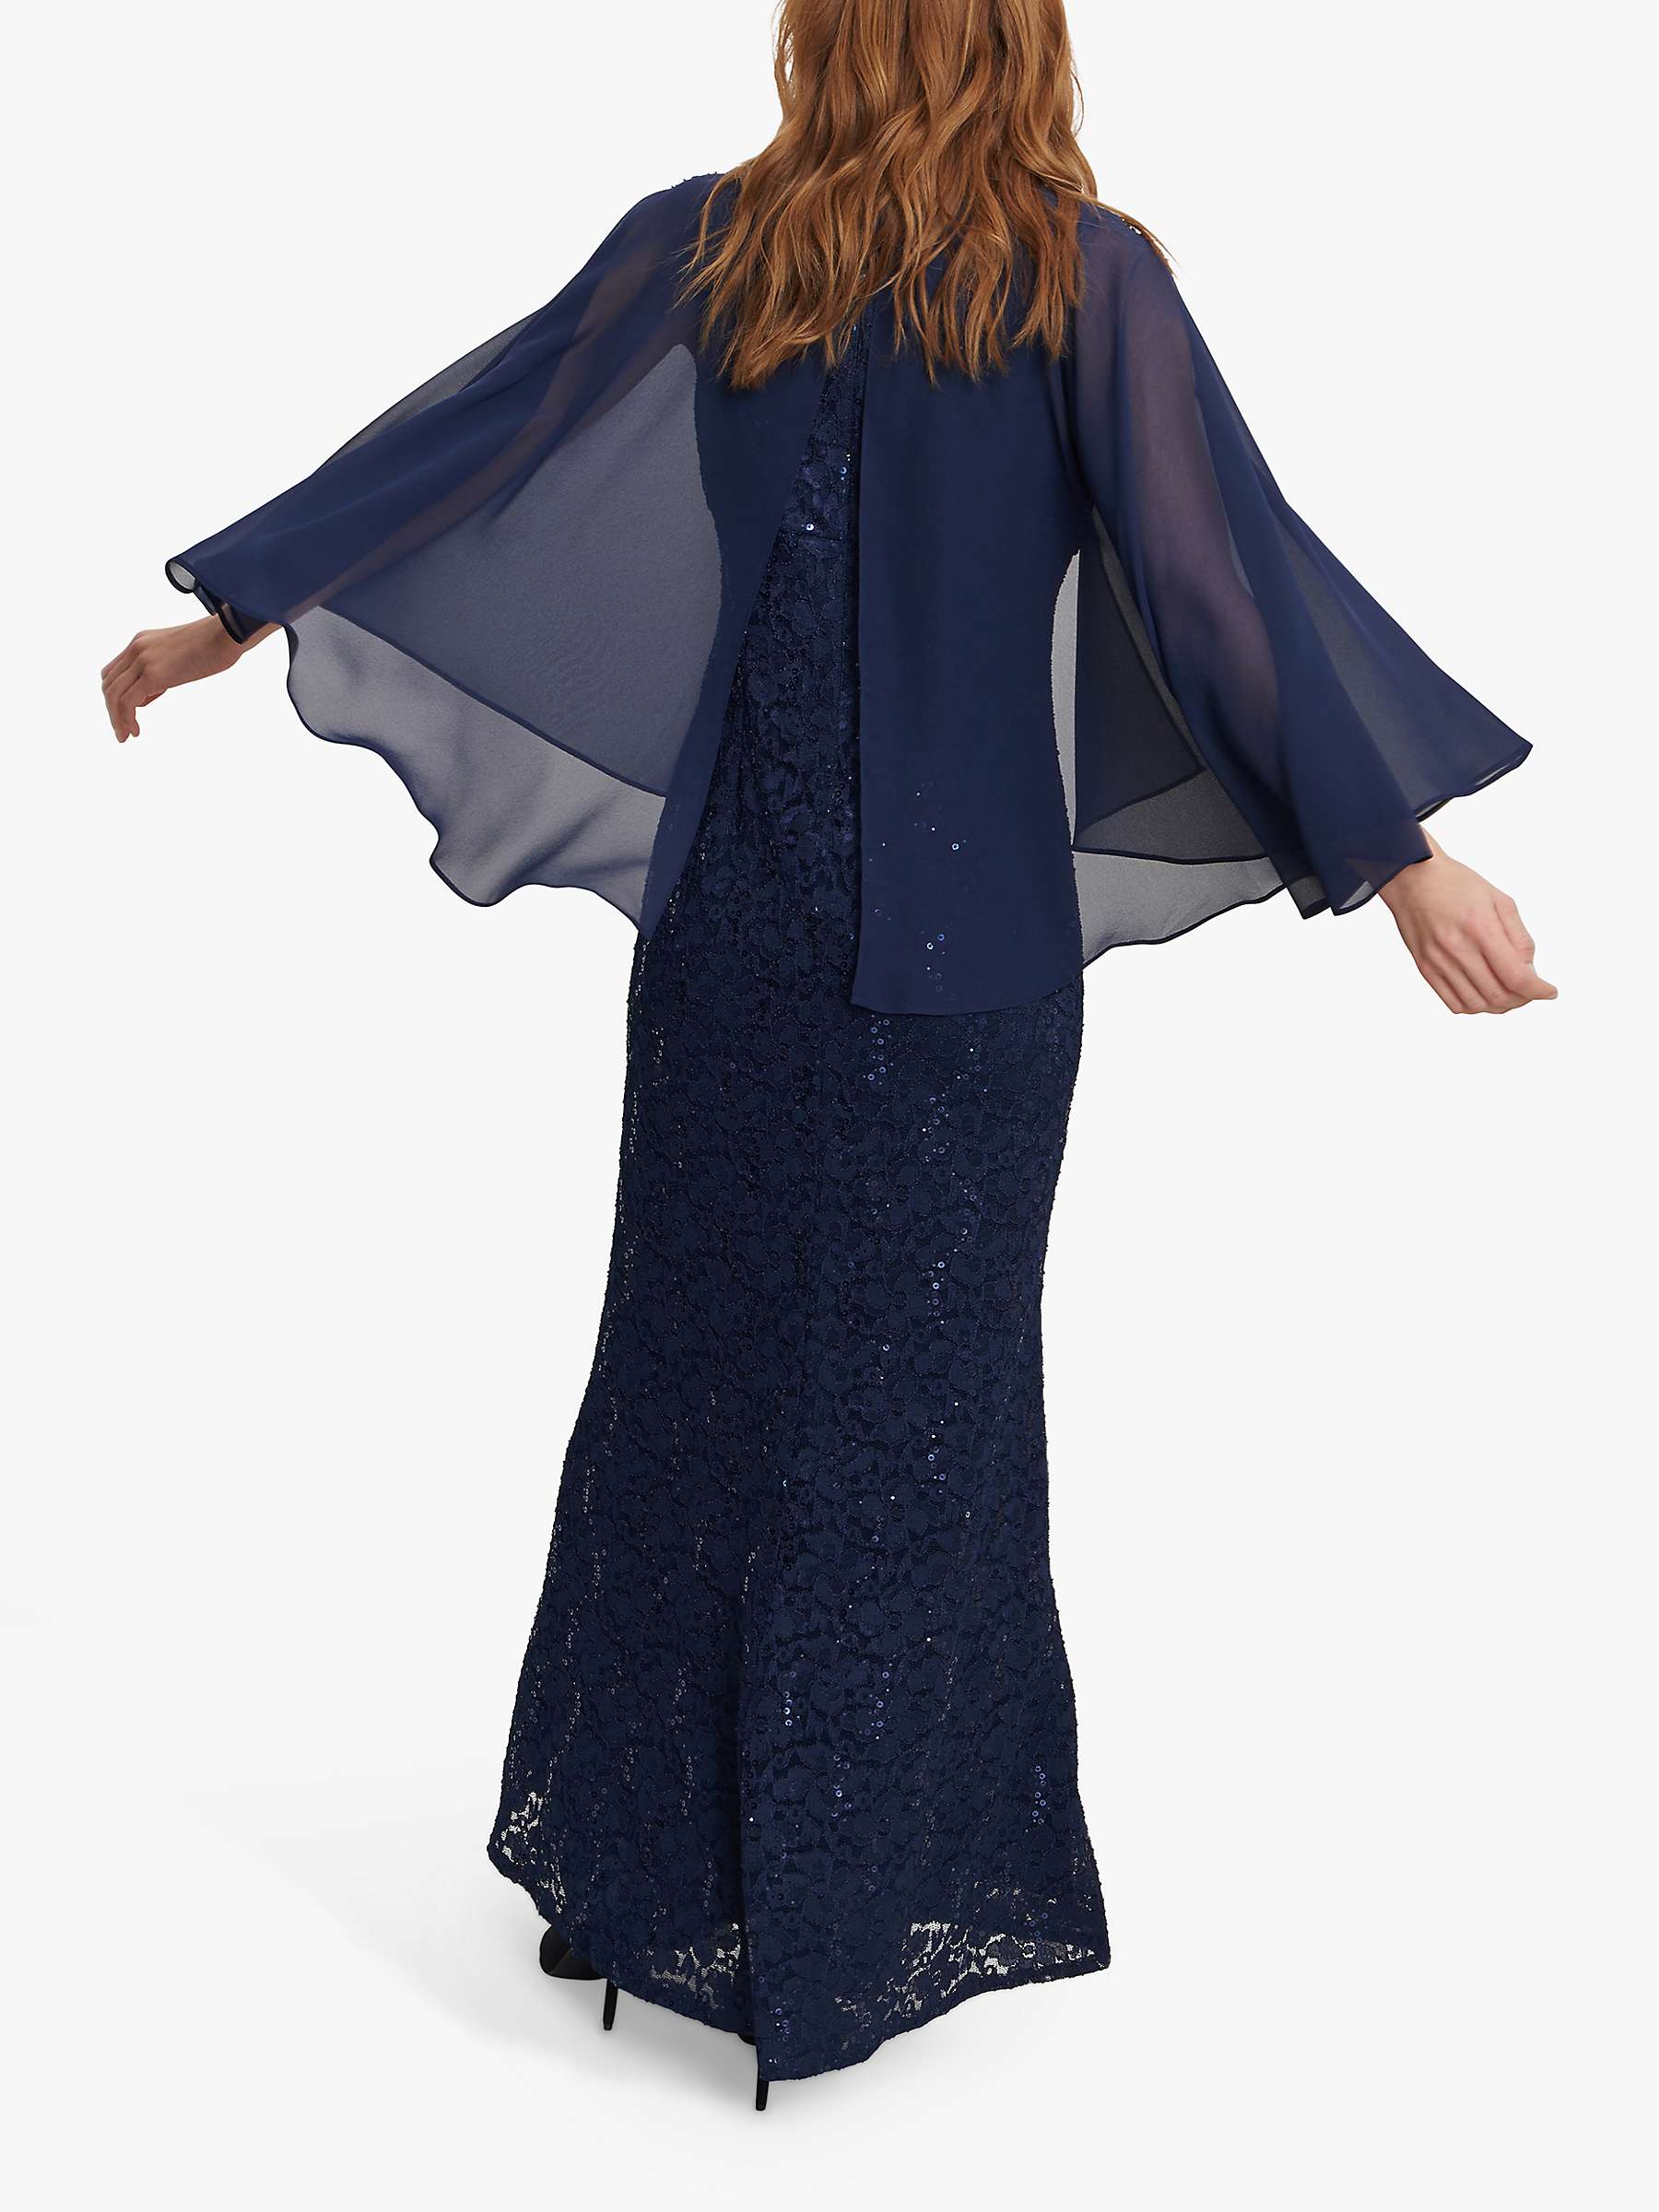 Buy Gina Bacconi Jayden Lace and Chiffon Caped Maxi Dress, Navy Online at johnlewis.com